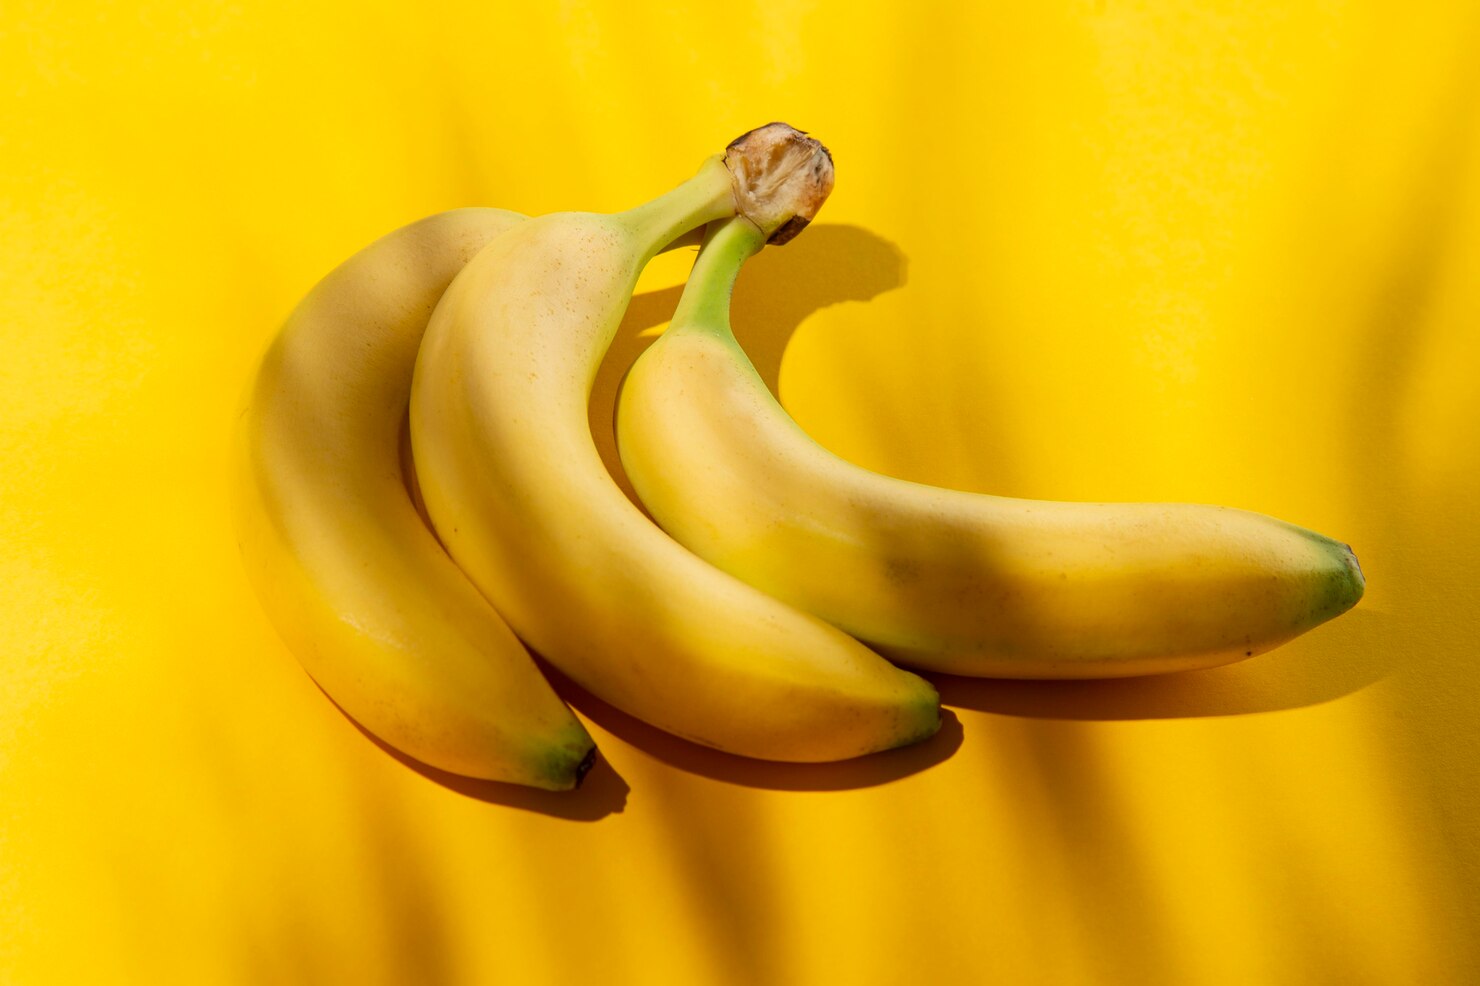 facts about banana for weight loss